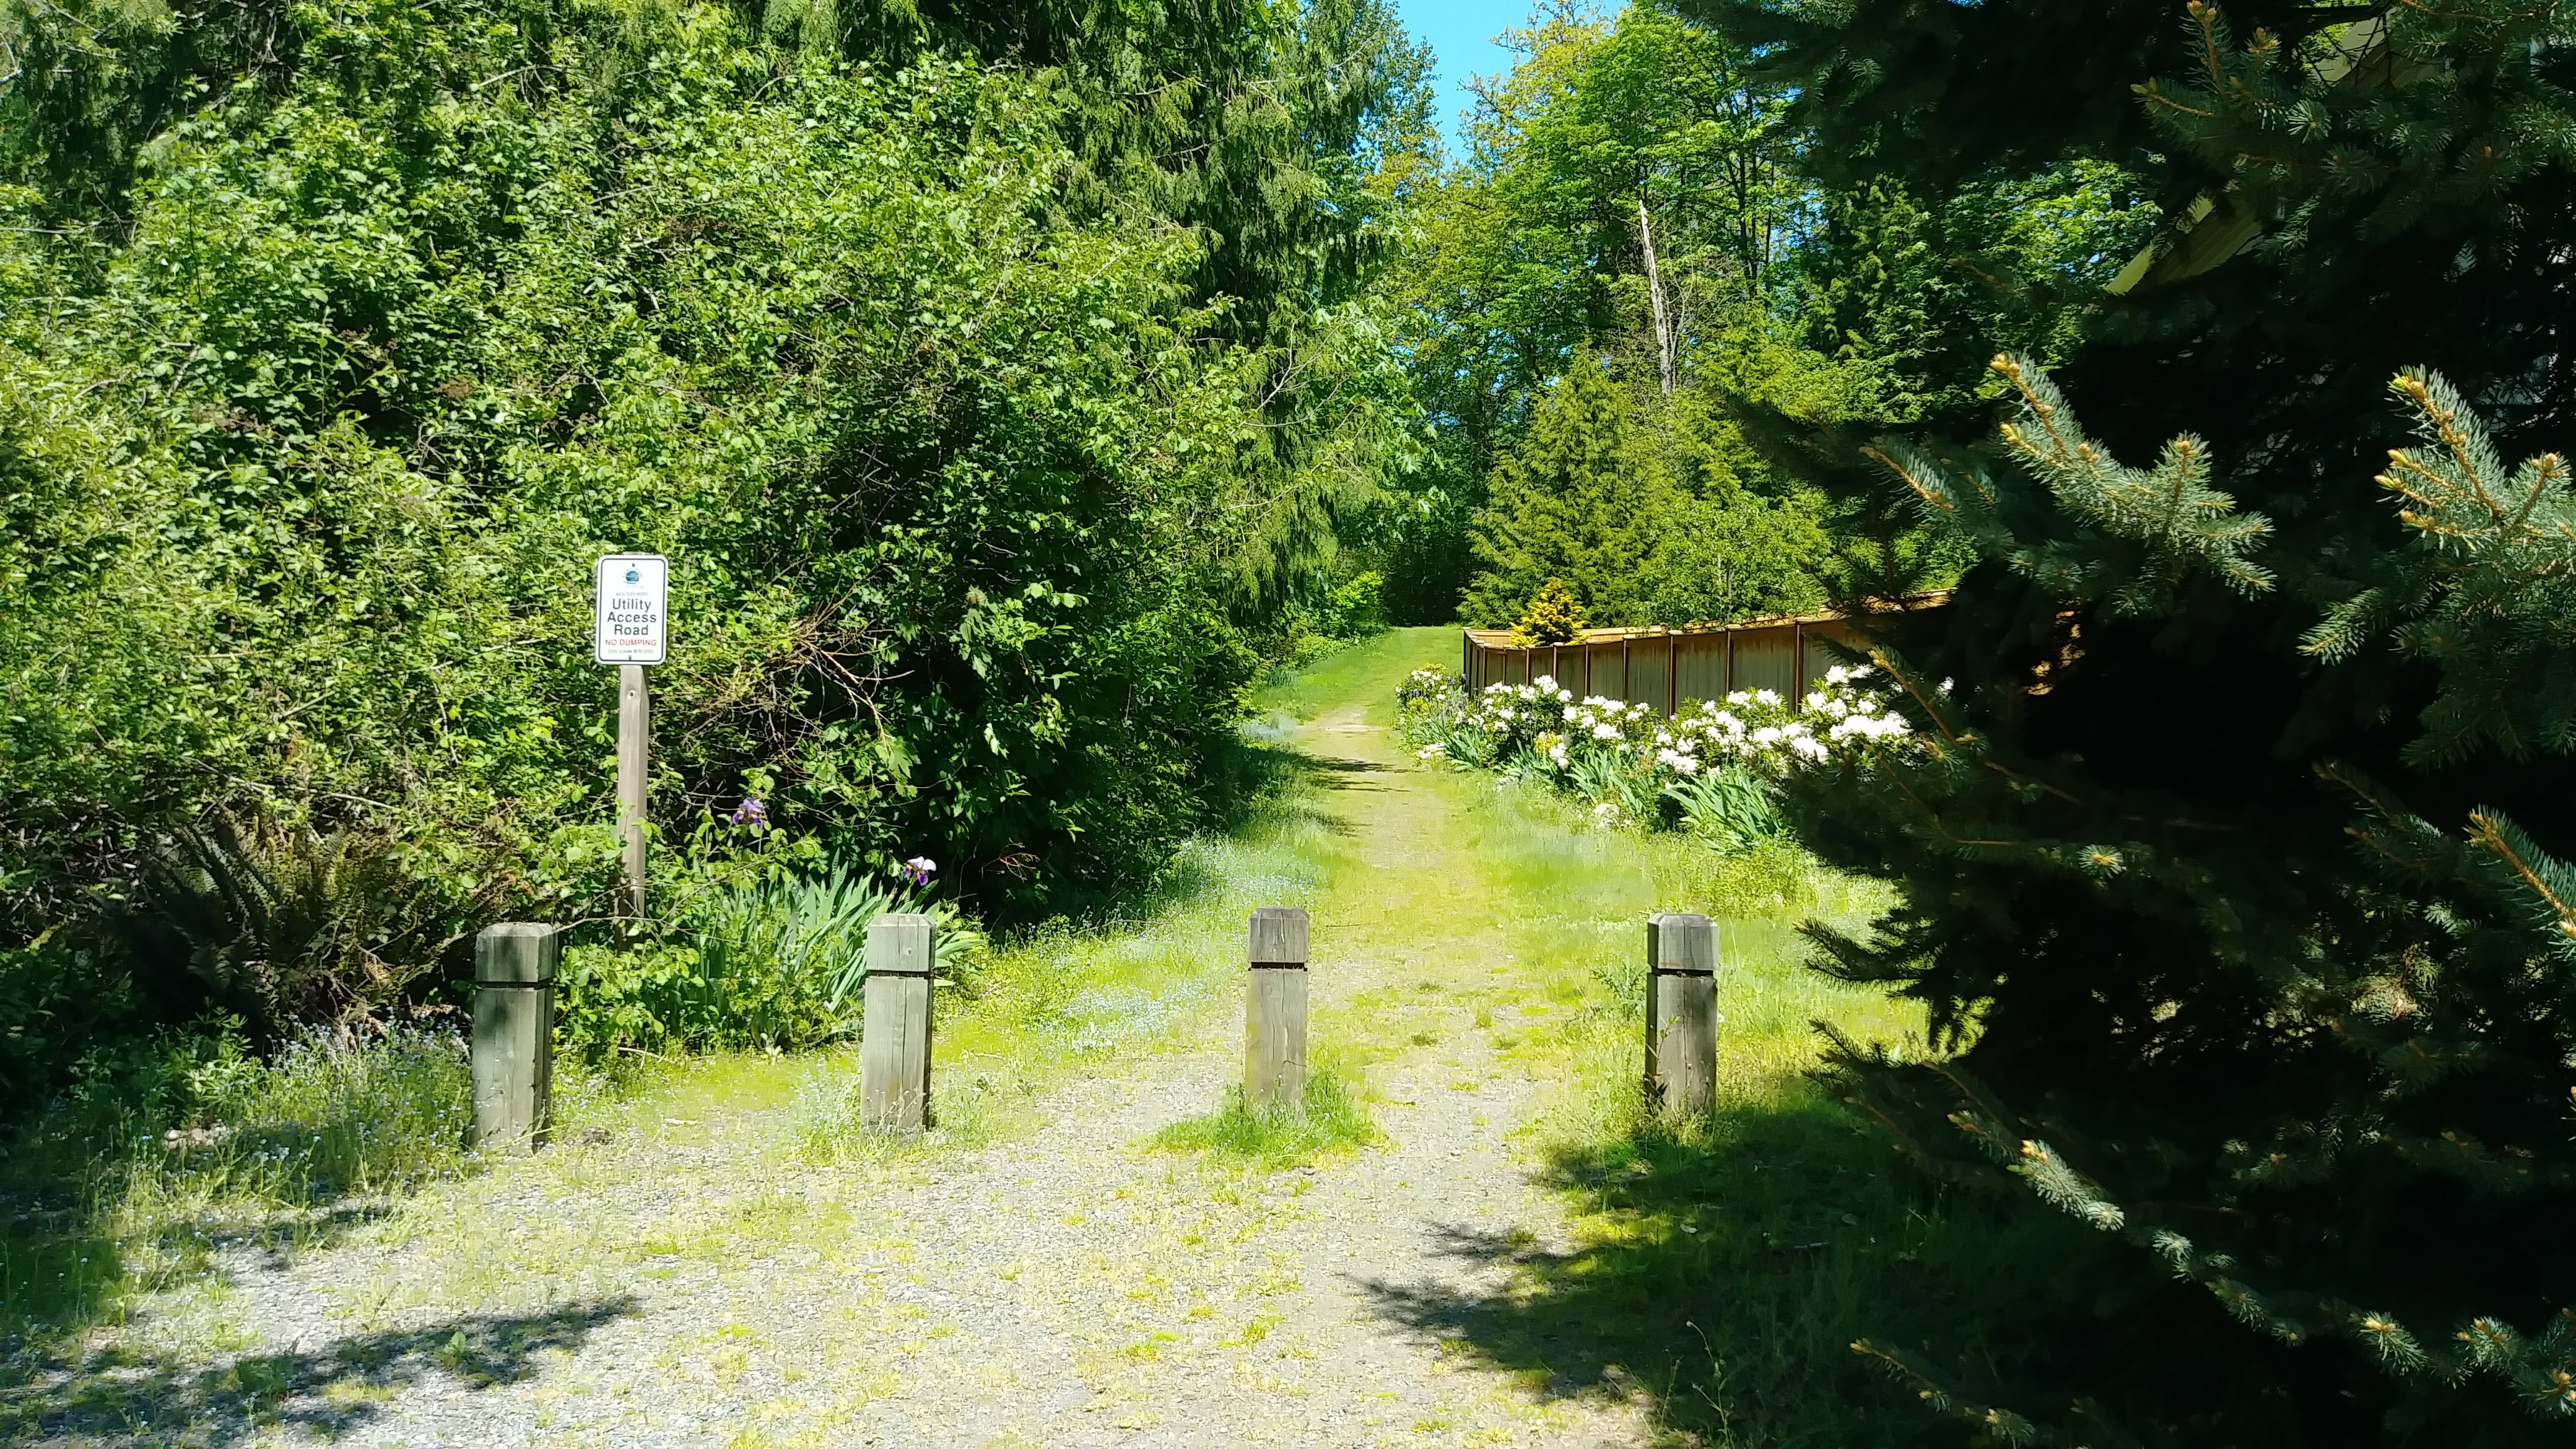 ../images/trails/heritage//01 Trail looking north from the SE 92th Street crossing.jpg